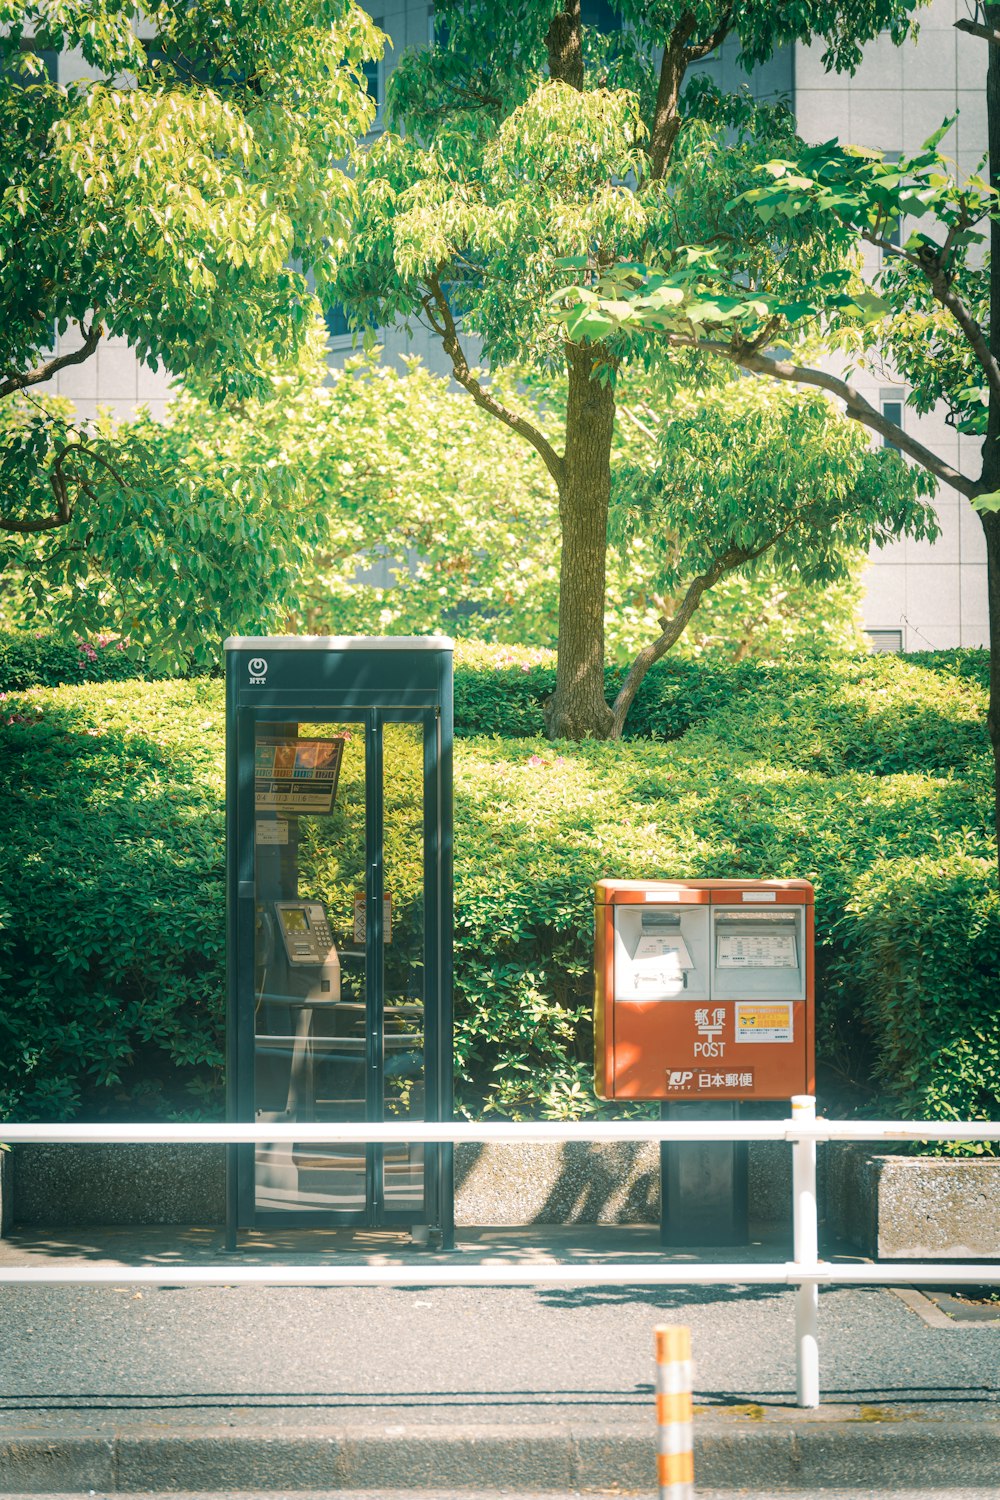 a public phone booth sitting next to a tree